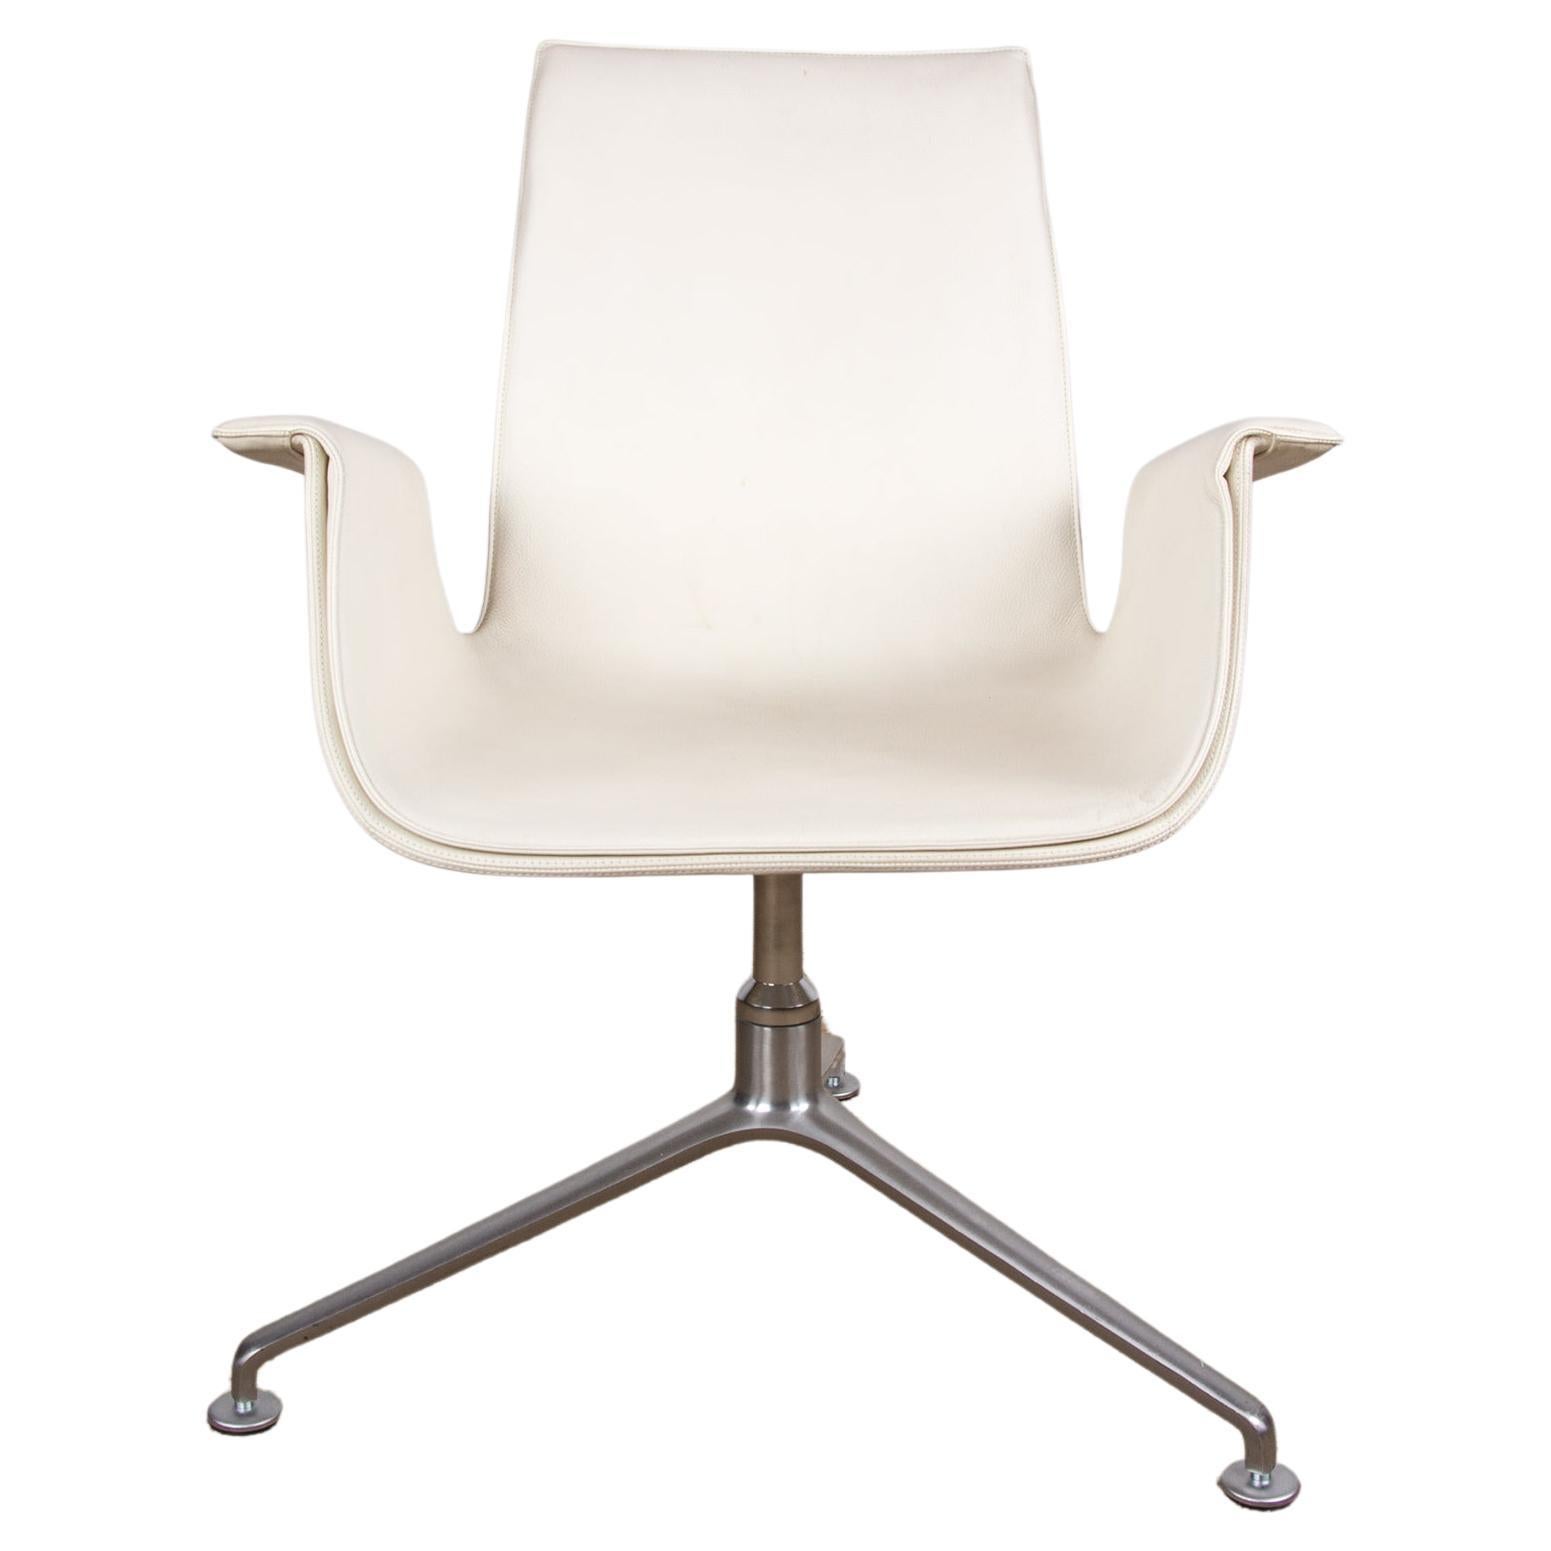 Danish armchair in white leather and chrome steel, model FK 6725 Fabricius/Knoll